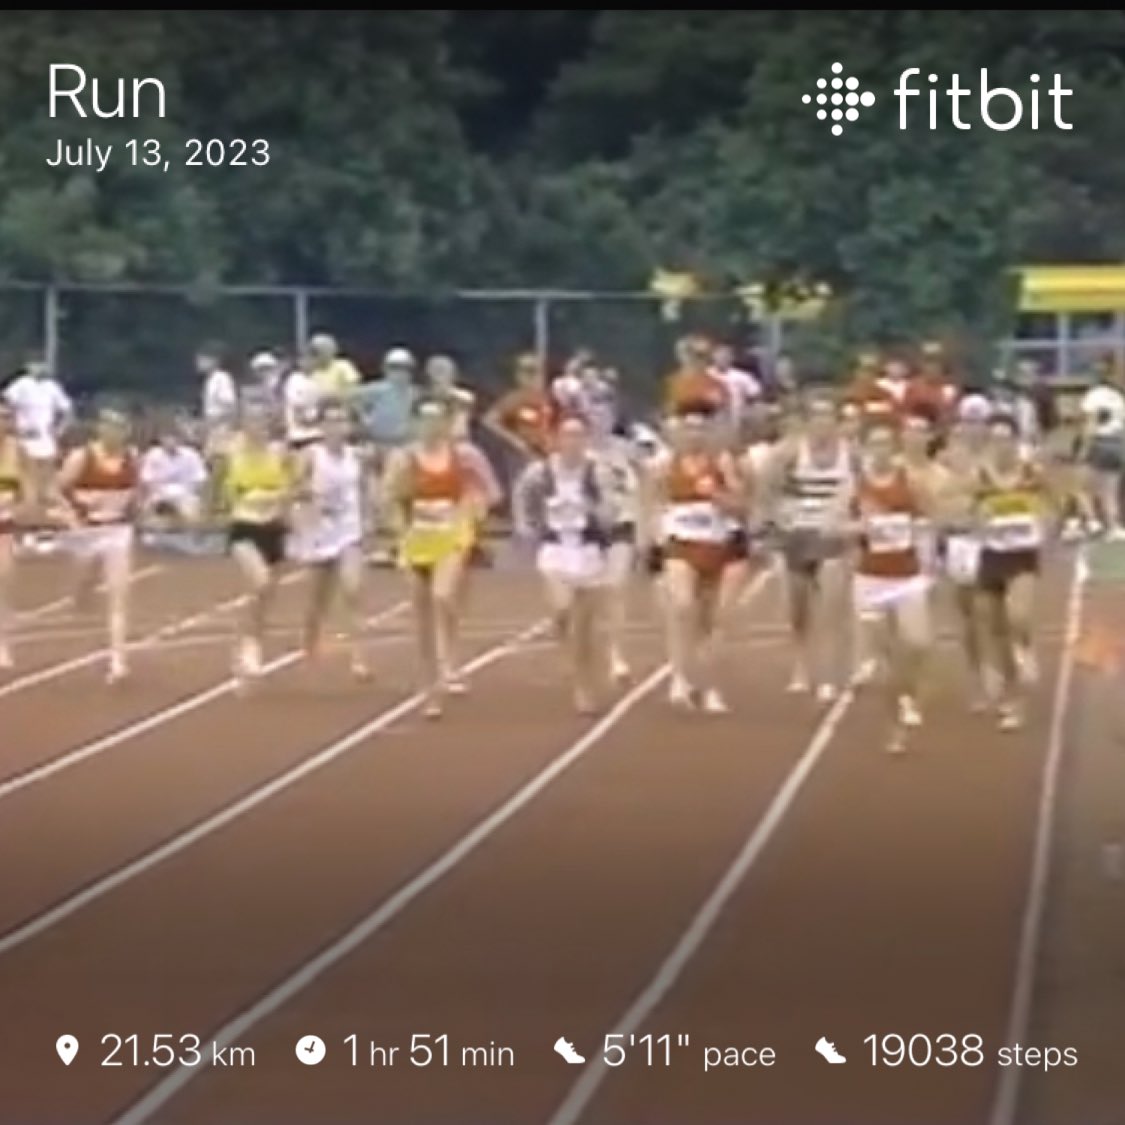 OFSAA 1987 3000m. I’m in the middle in white shorts with blue and white shirt. Ran my pb of 8:54 in this race. Greg Anderson ran 8:00, set the Canadian national high school record which still stands! Brendan Mathias second in 8:13 ran in the ‘92 Olympics 5000m. #ofsaa #3000 #run